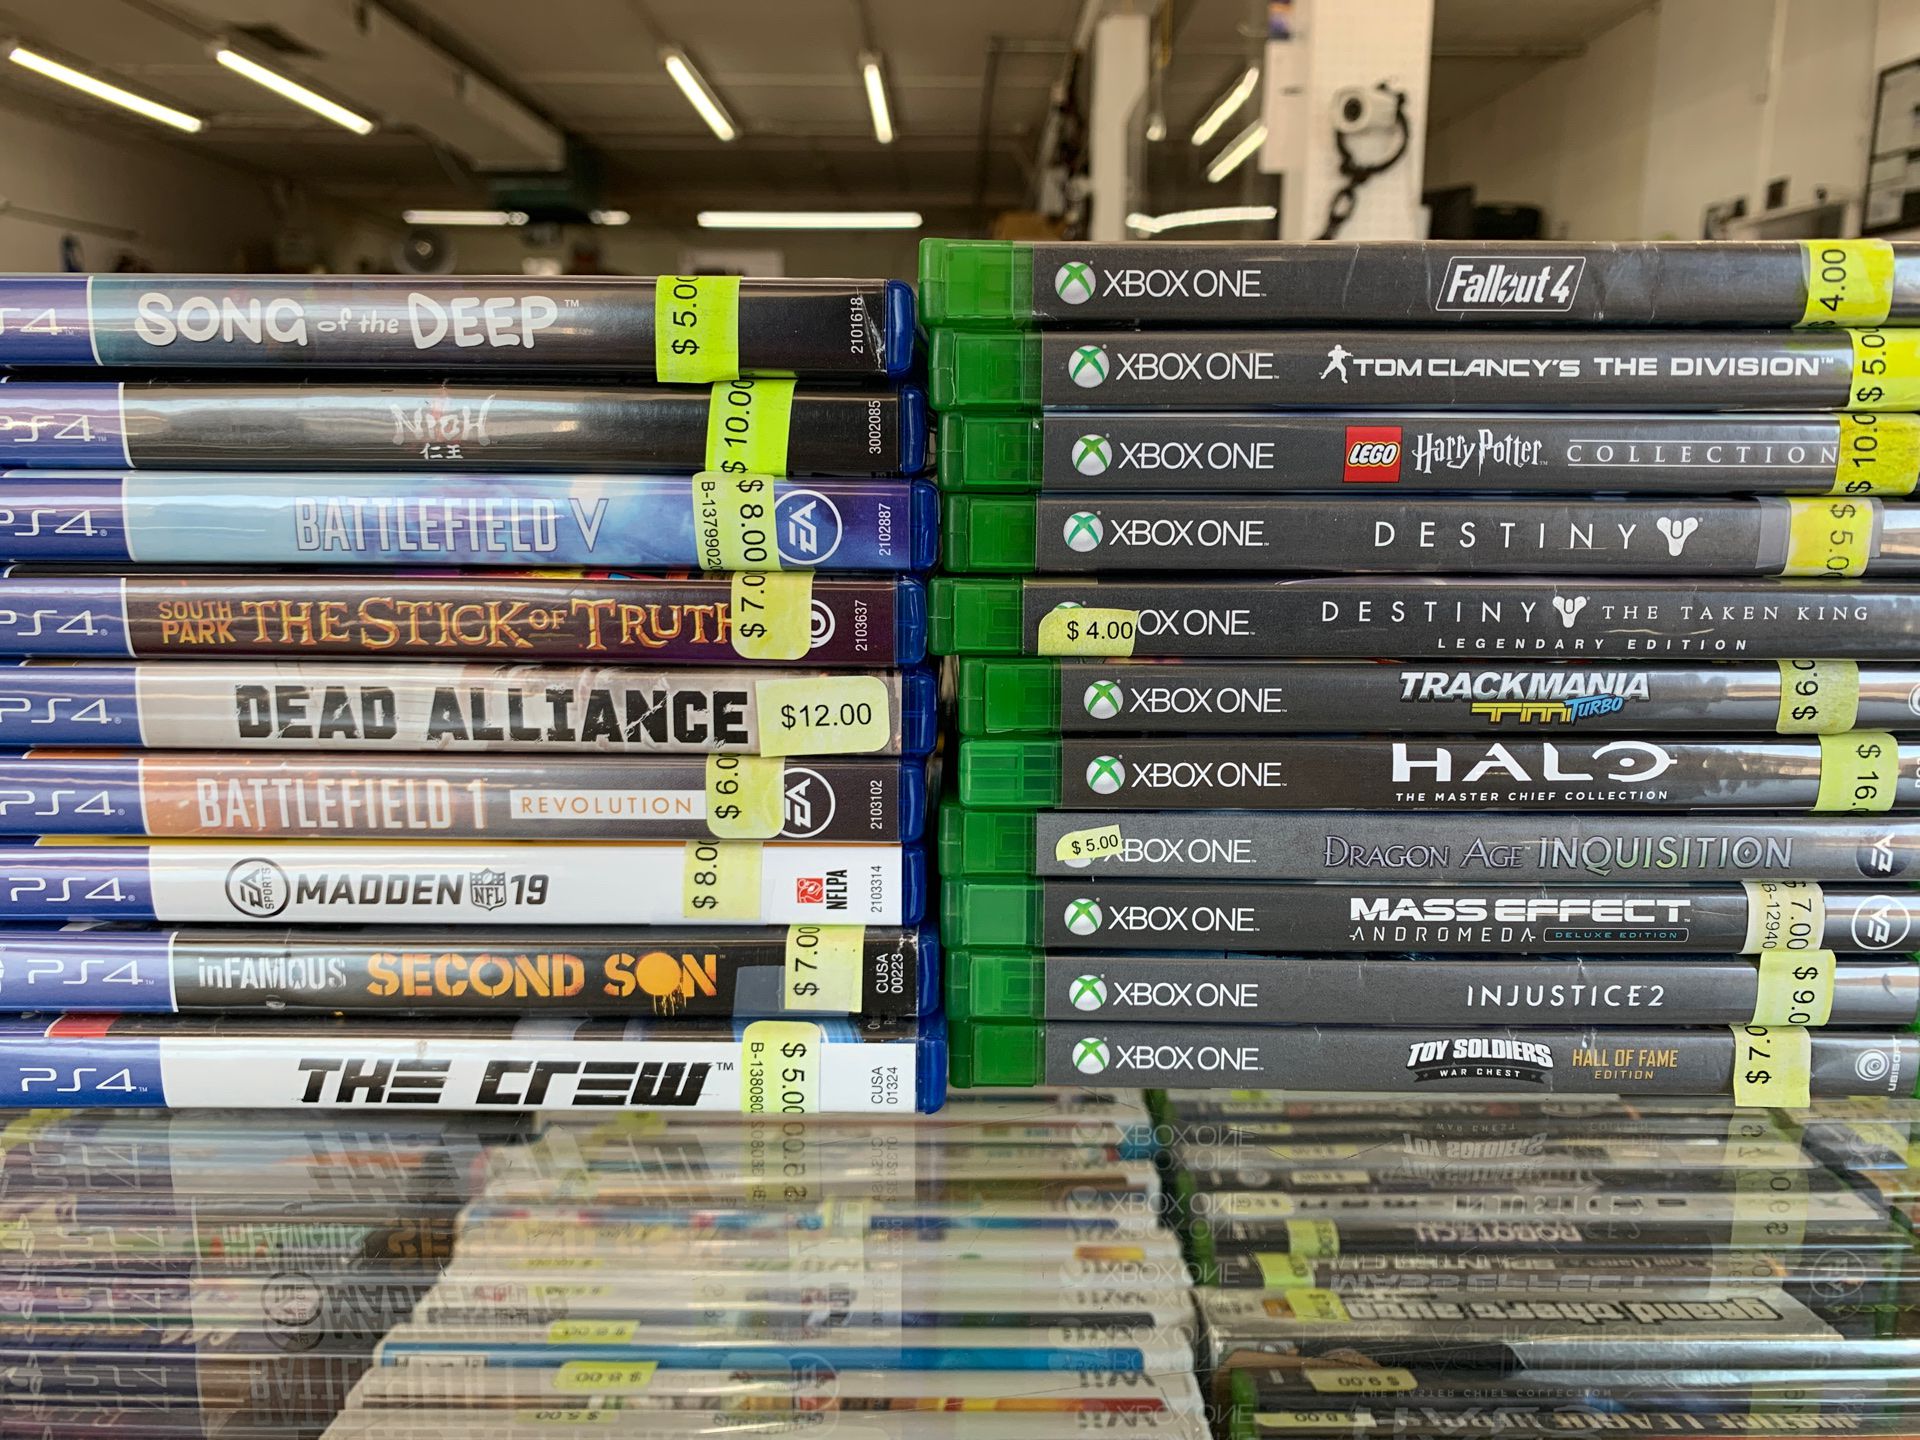 Lots of video games